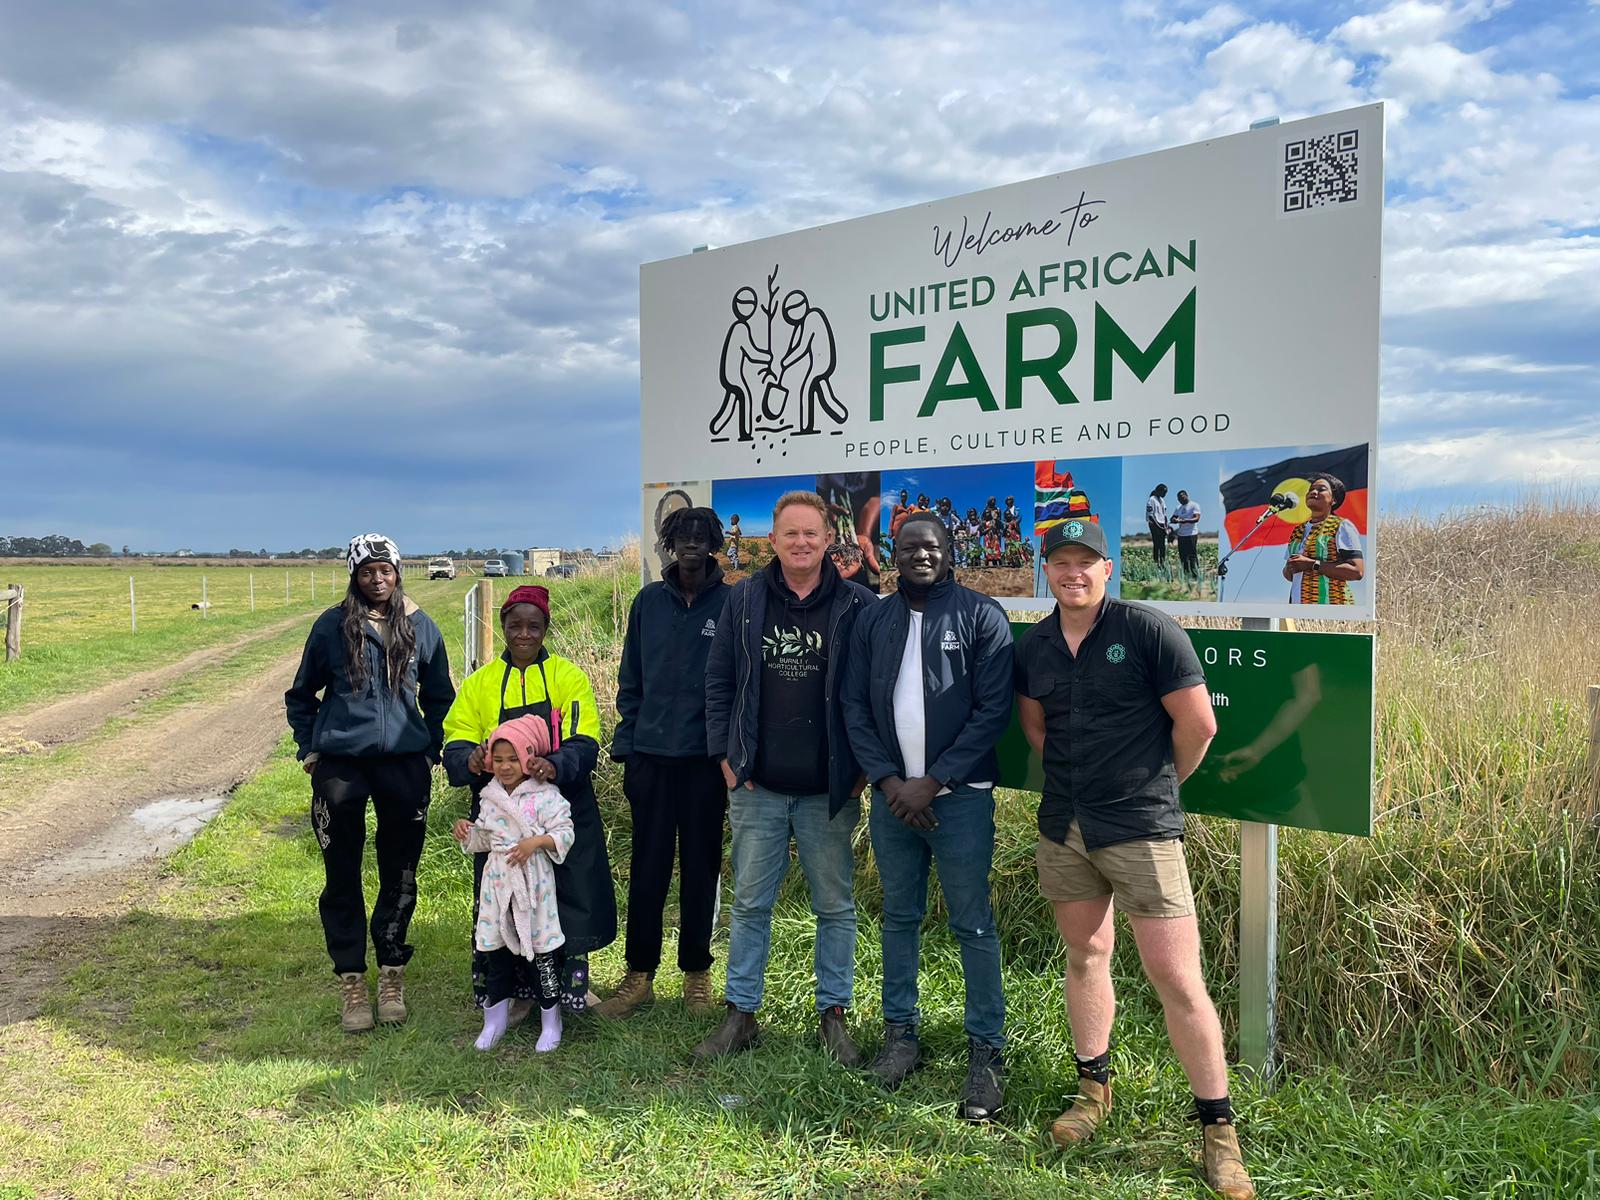 Thuch Ajak’s quest to preserve cultures through farming in Australia